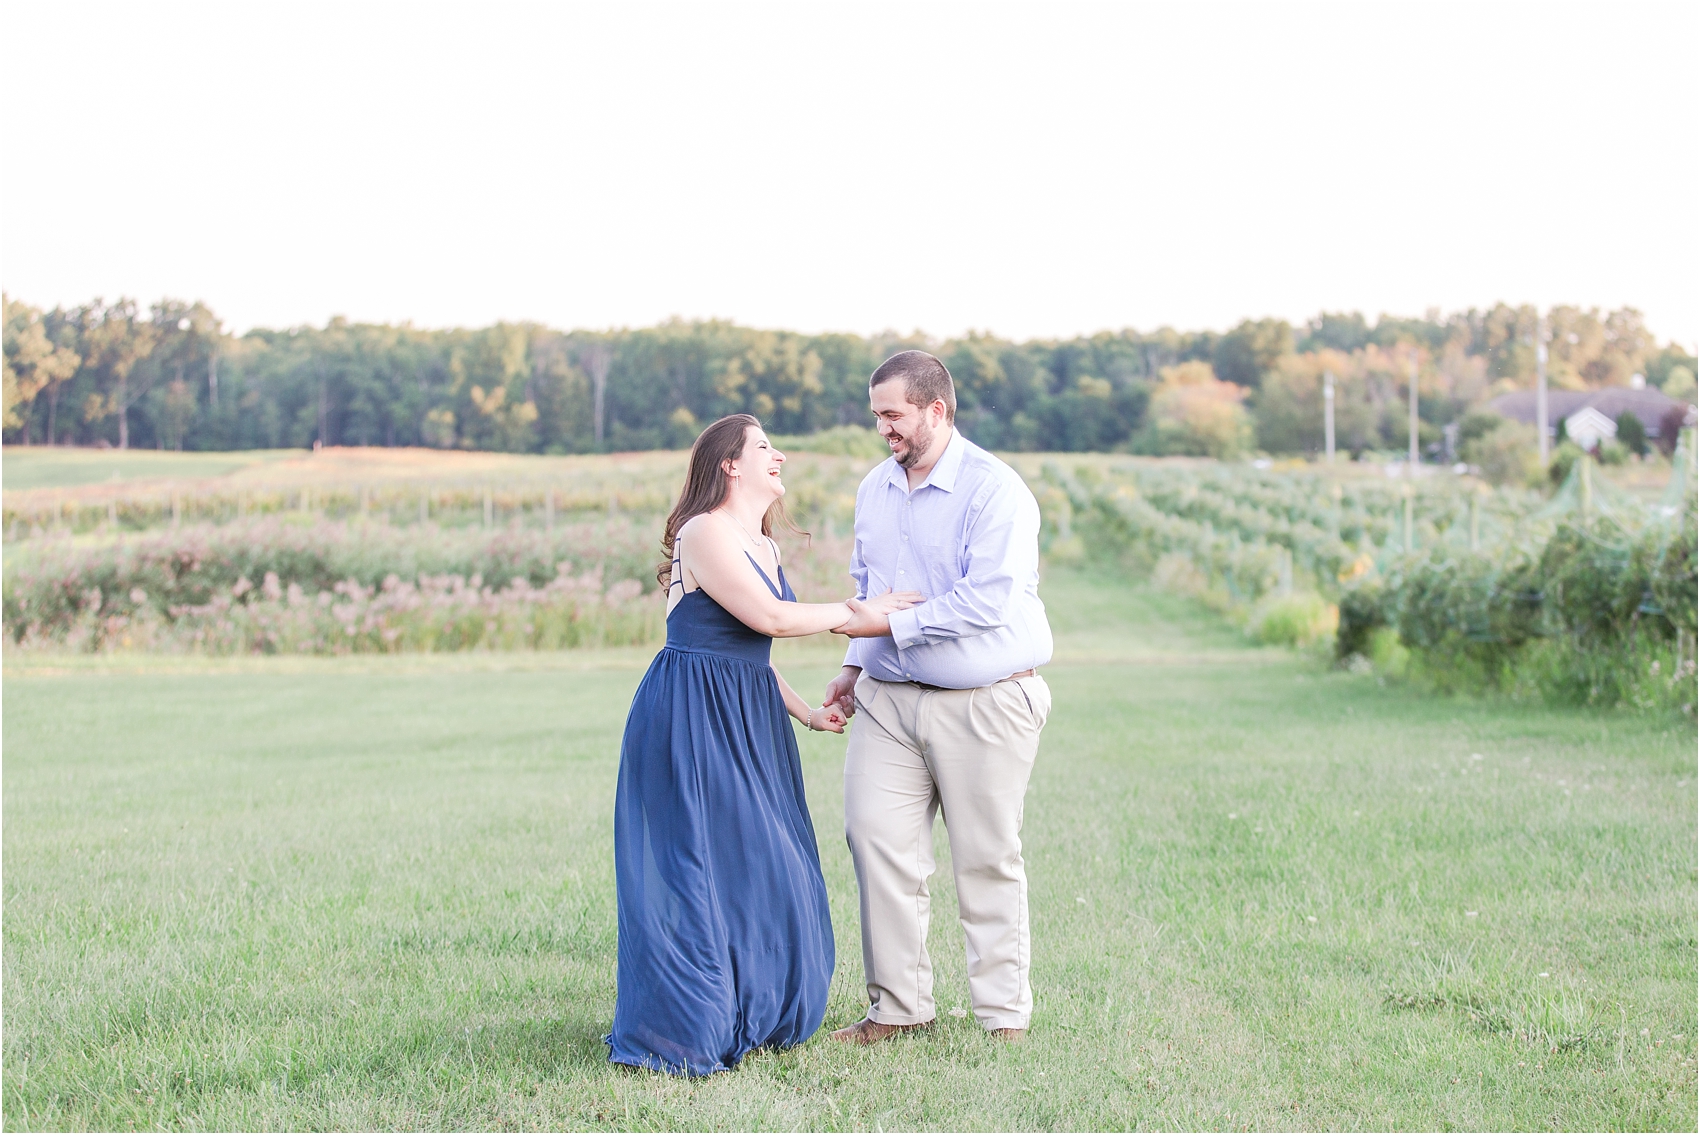 candid-romantic-summer-engagement-photos-at-hidden-lake-gardens-and-black-fire-winery-in-tipton-mi-by-courtney-carolyn-photography_0006.jpg